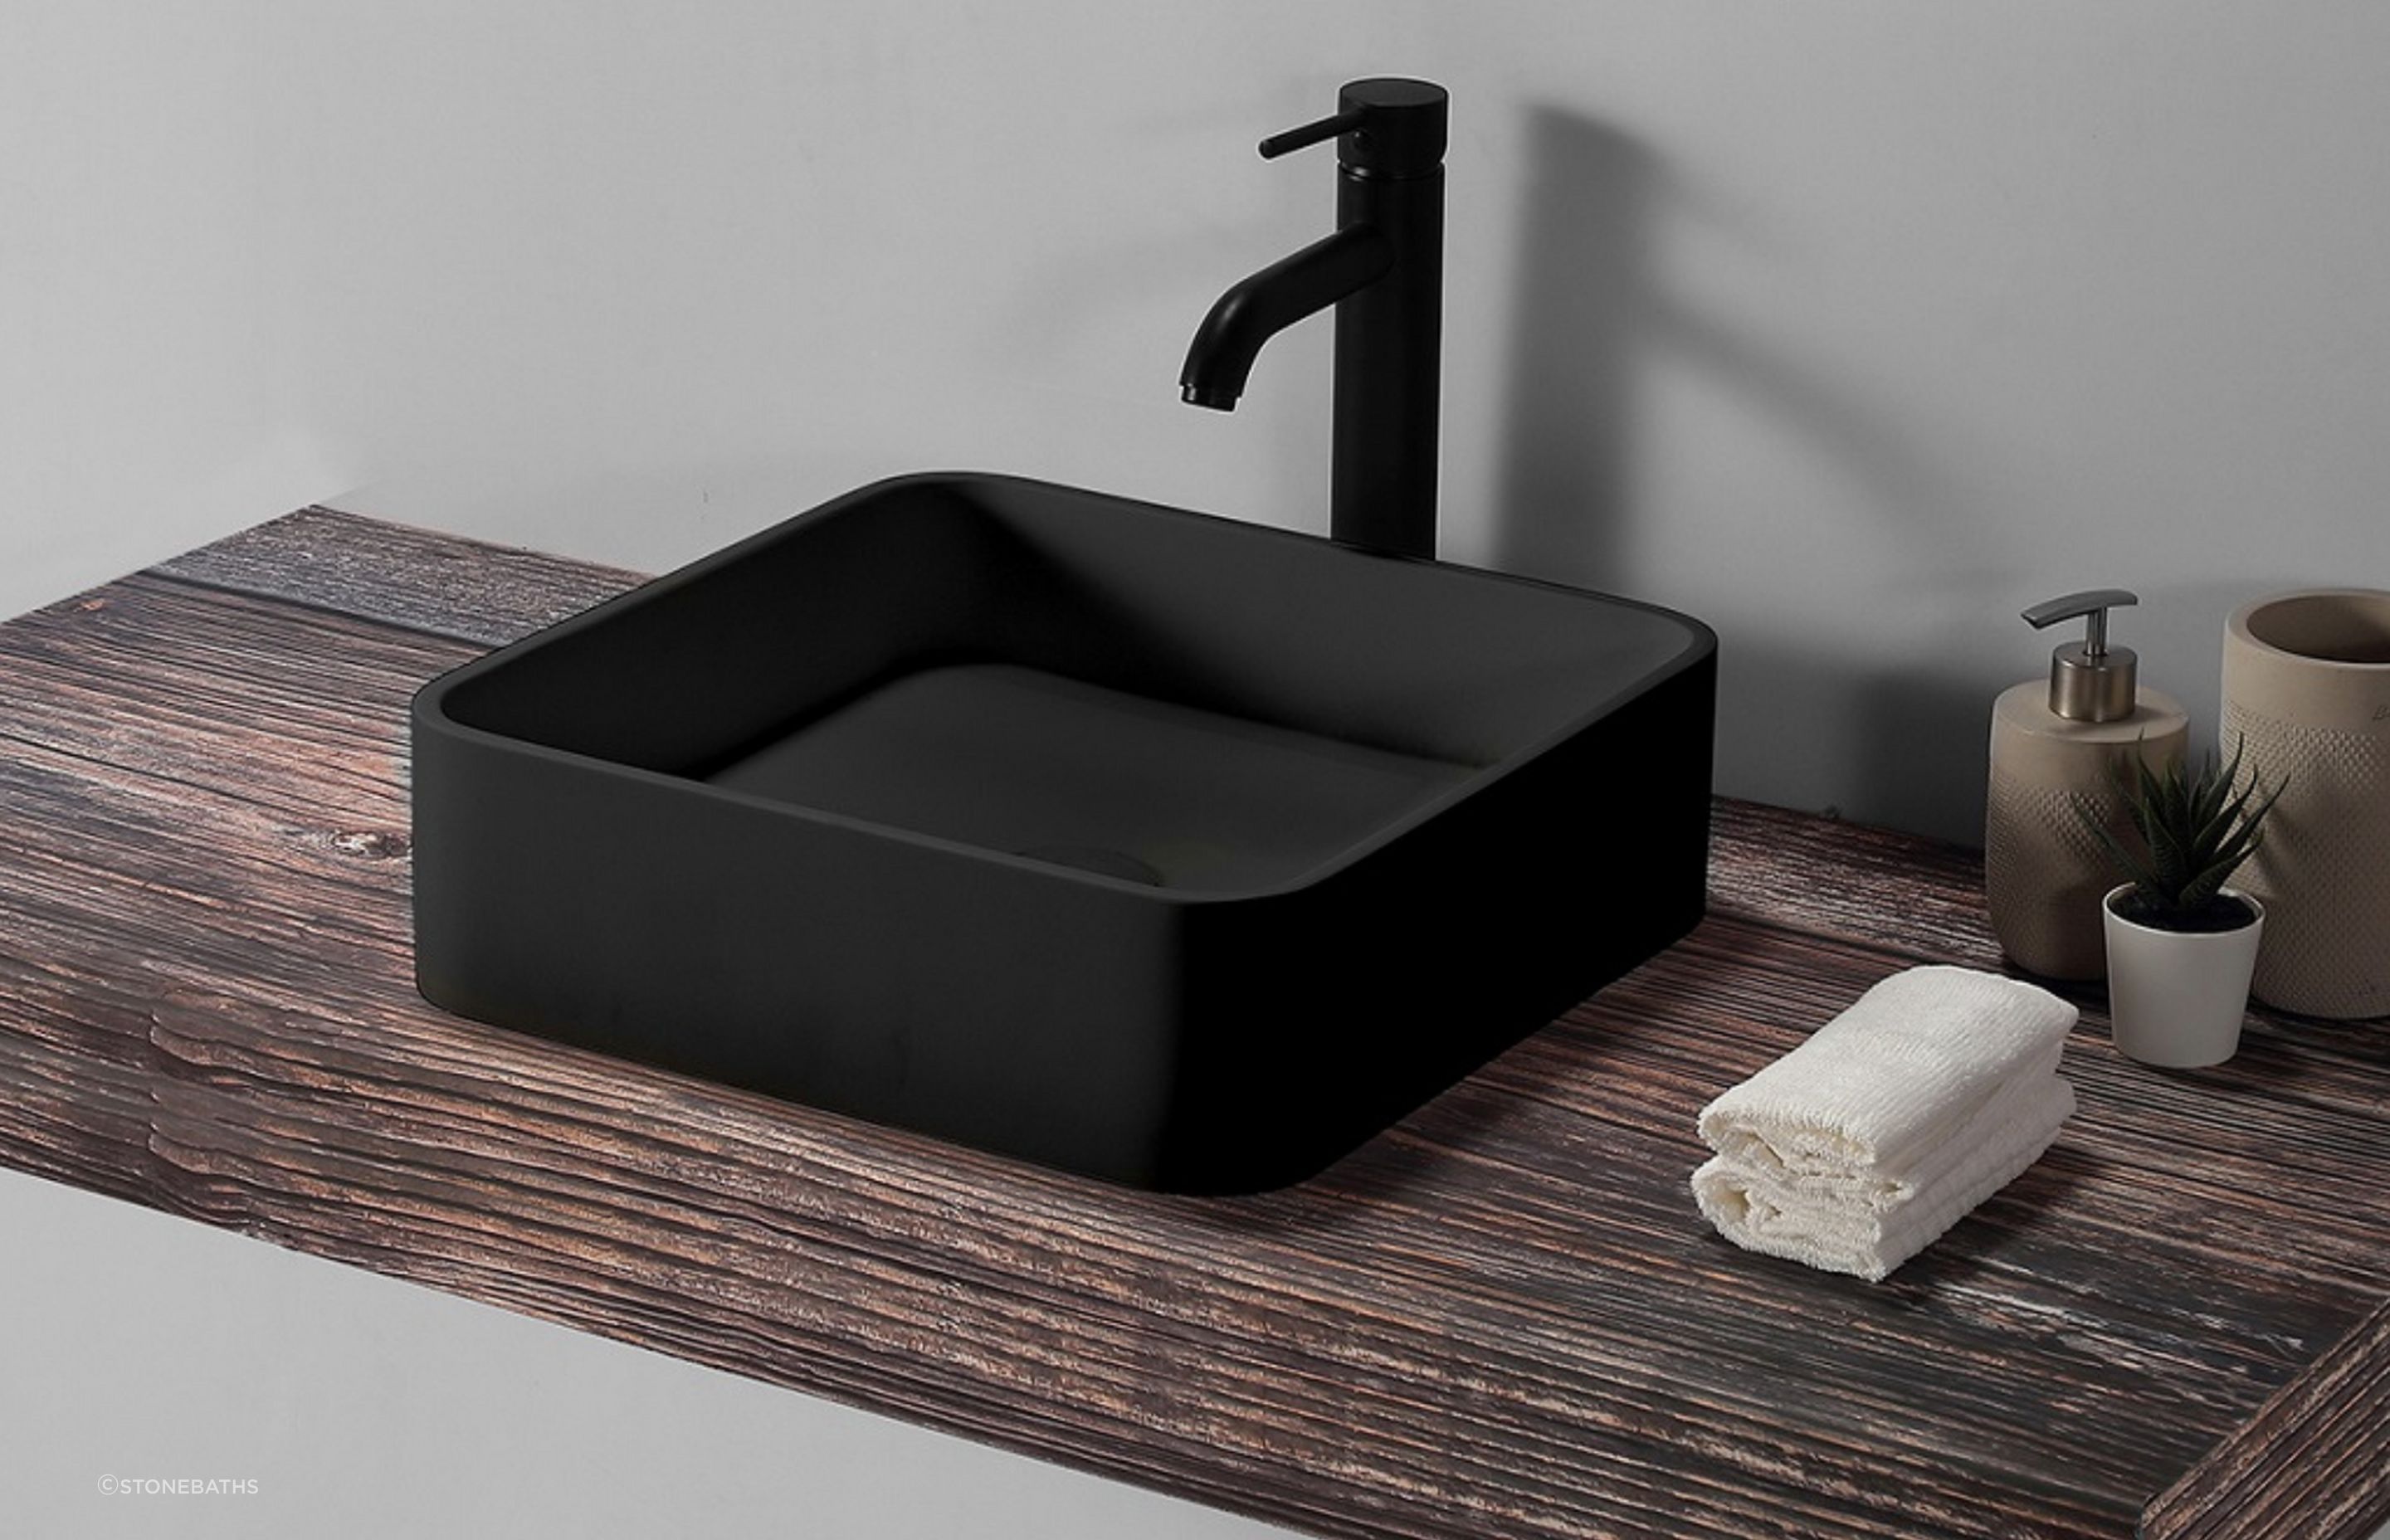 The beautiful B1700 Square Basin from Stonebaths the woooden panel adds a touch of natural beauty to the space